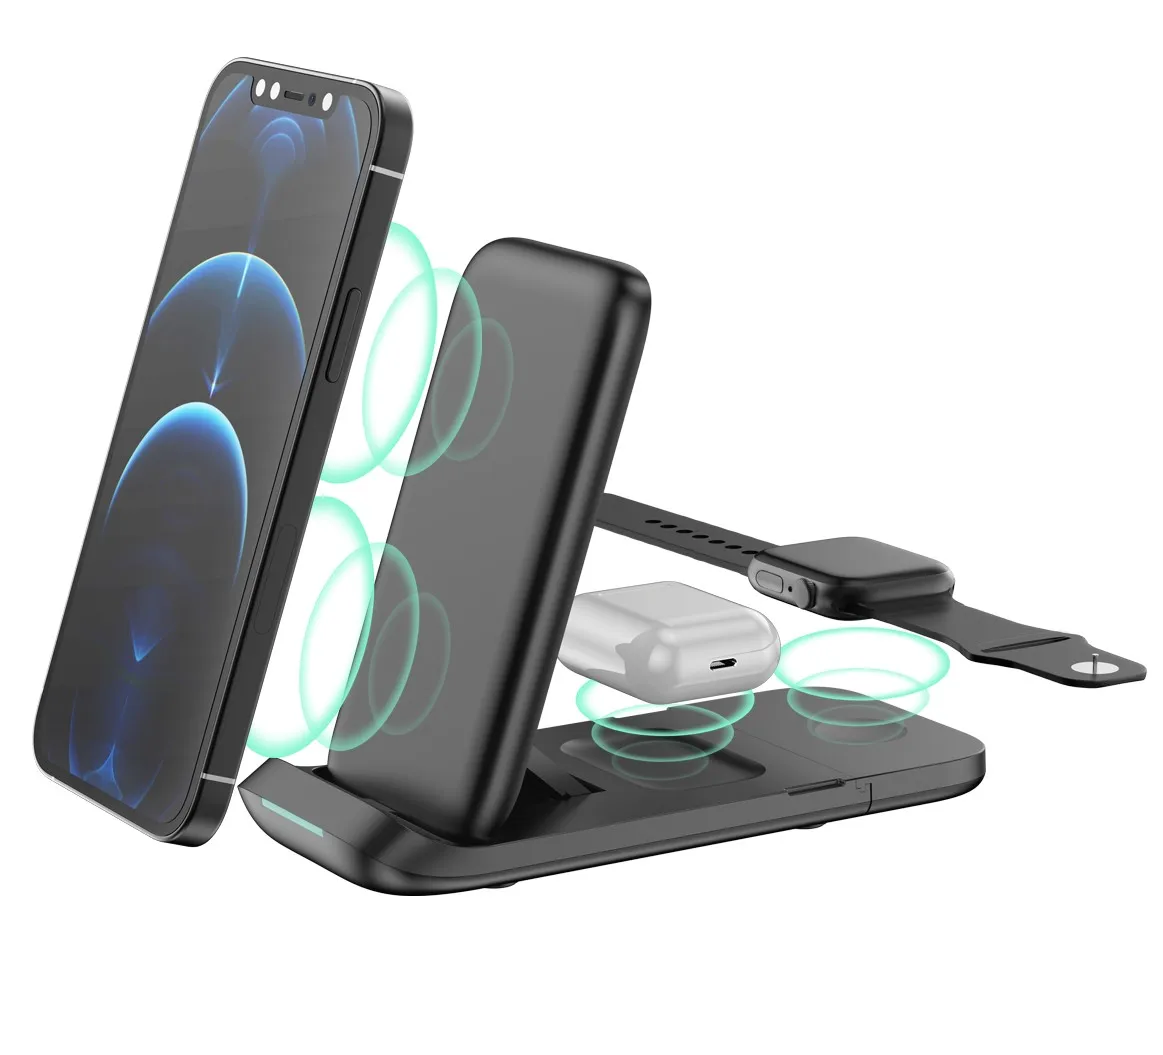 

Portable Mobile Fast 3 in 1 Folding Magnetic Wireless Charger Station Holder10W 15W Foldable Phone Charger